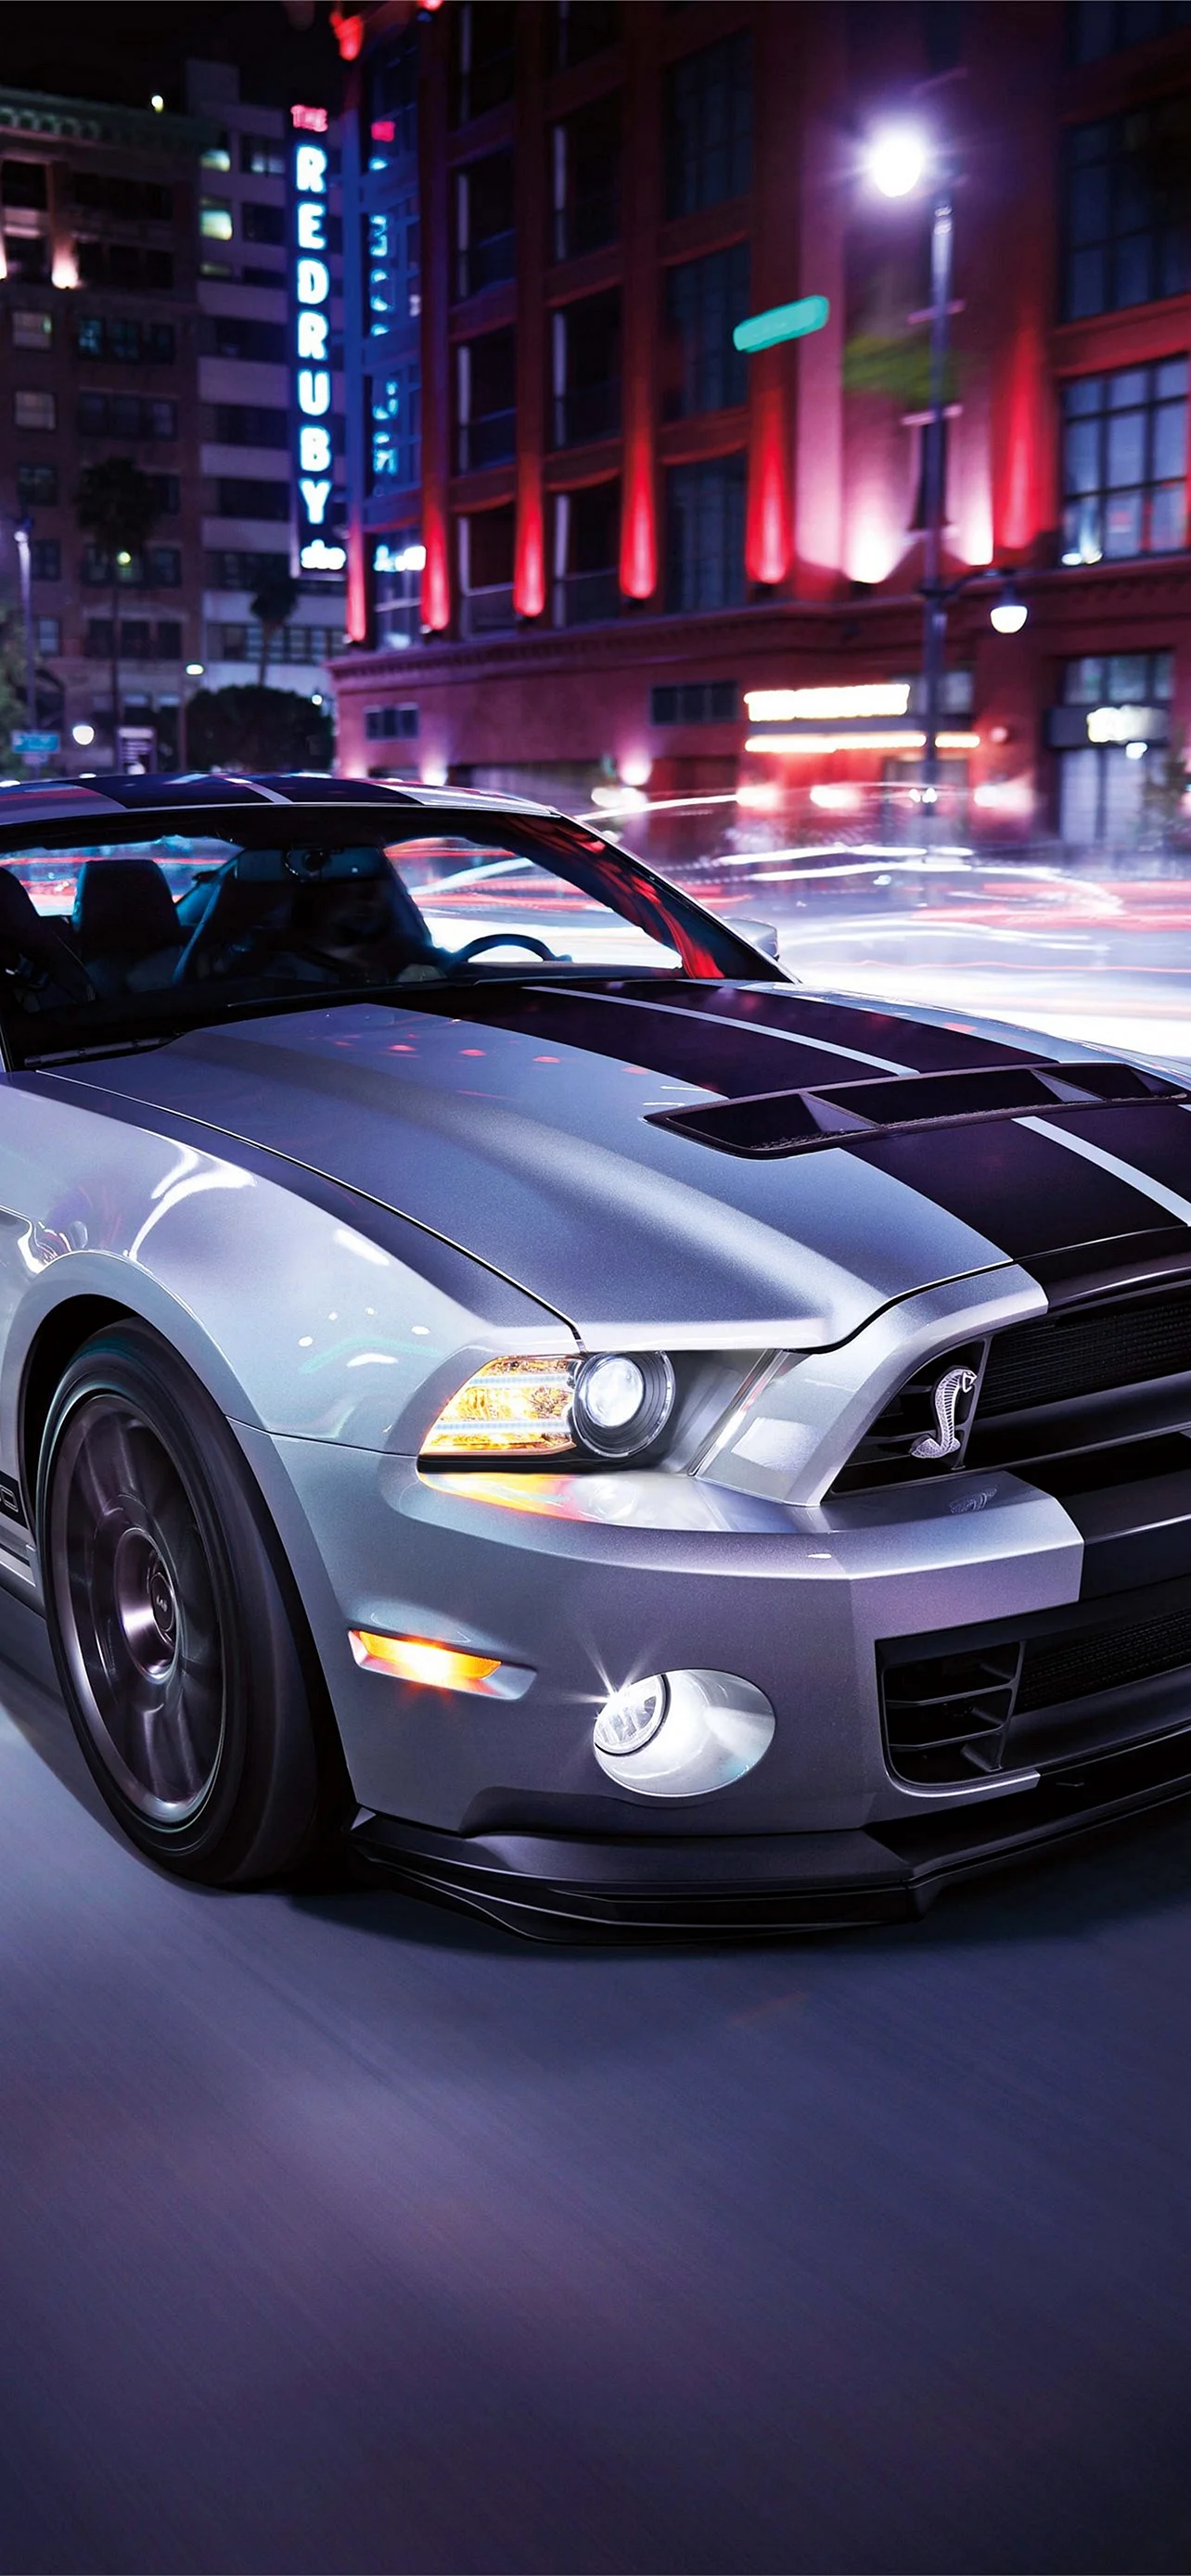 Ford Shelby Gt500 Wallpaper for iPhone 12 Pro Max